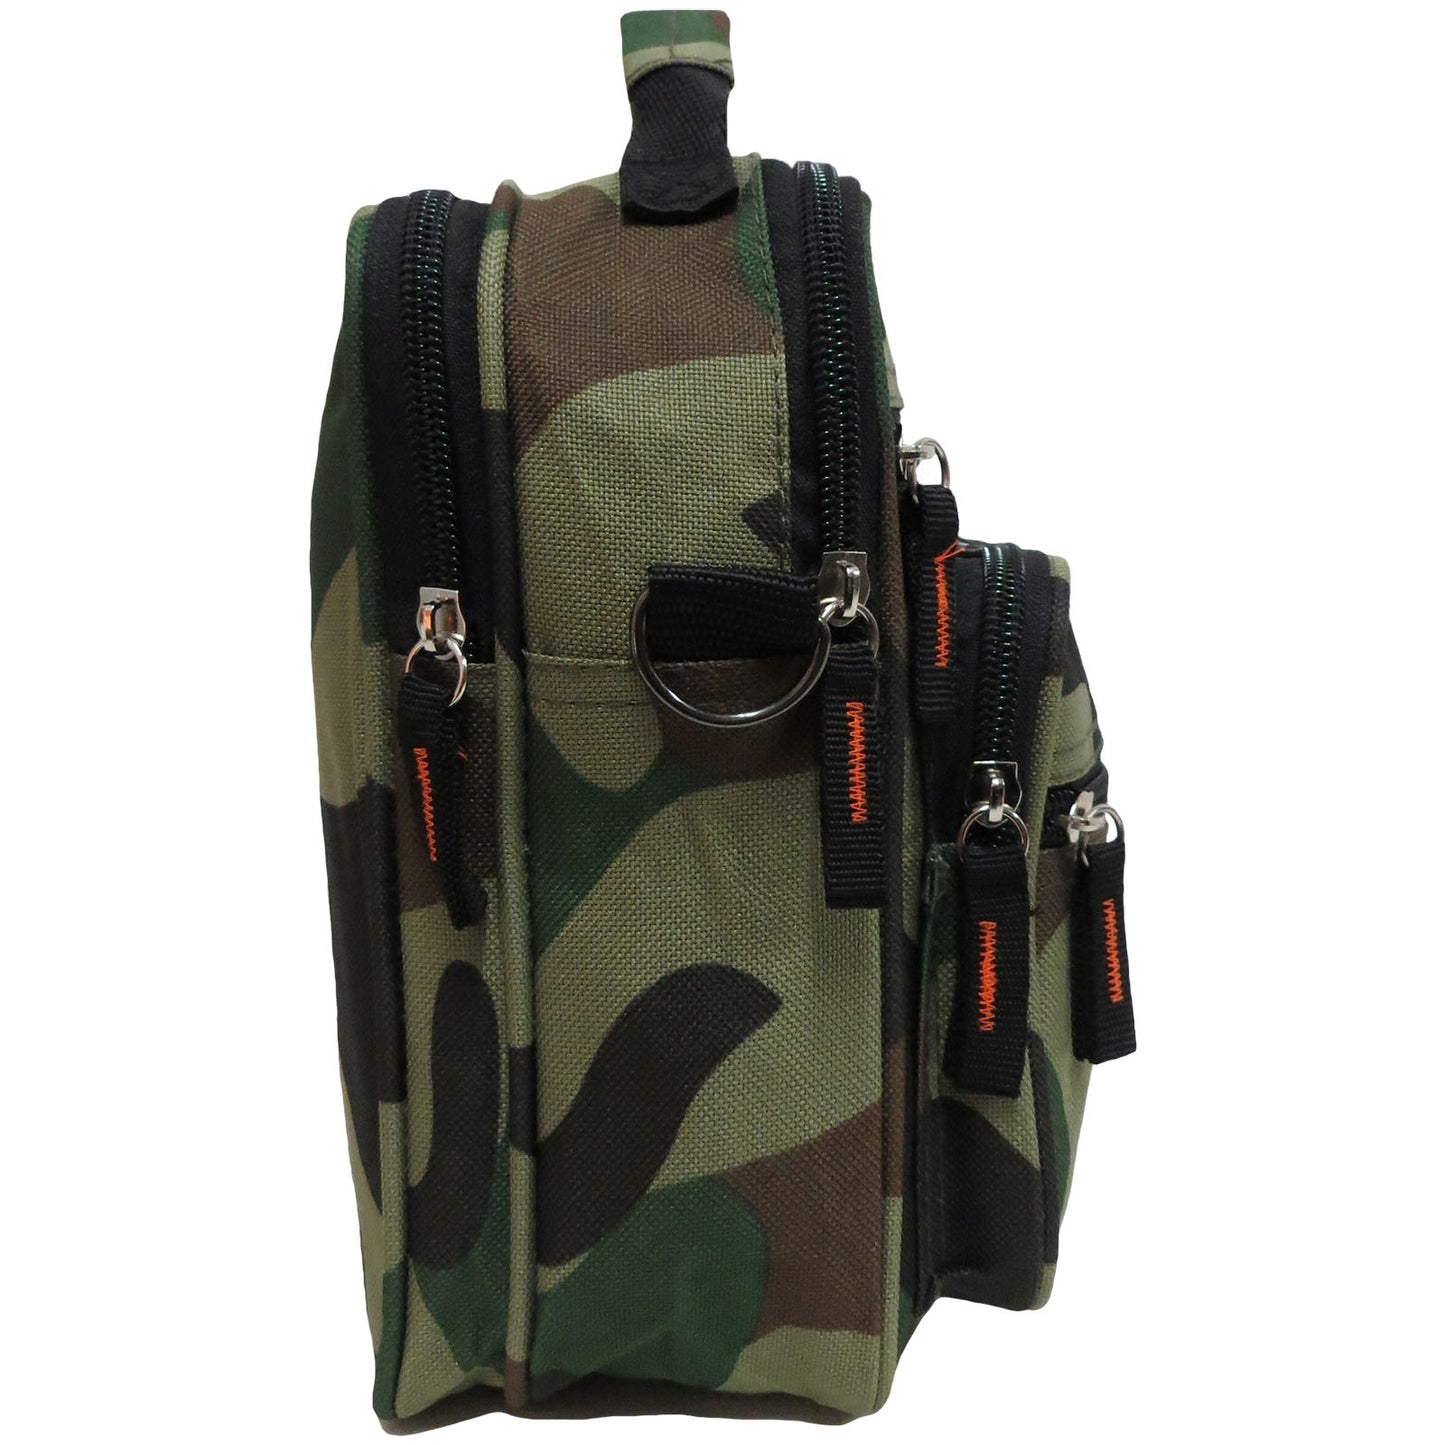 Camouflage messenger bag with an adjustable and removable strap